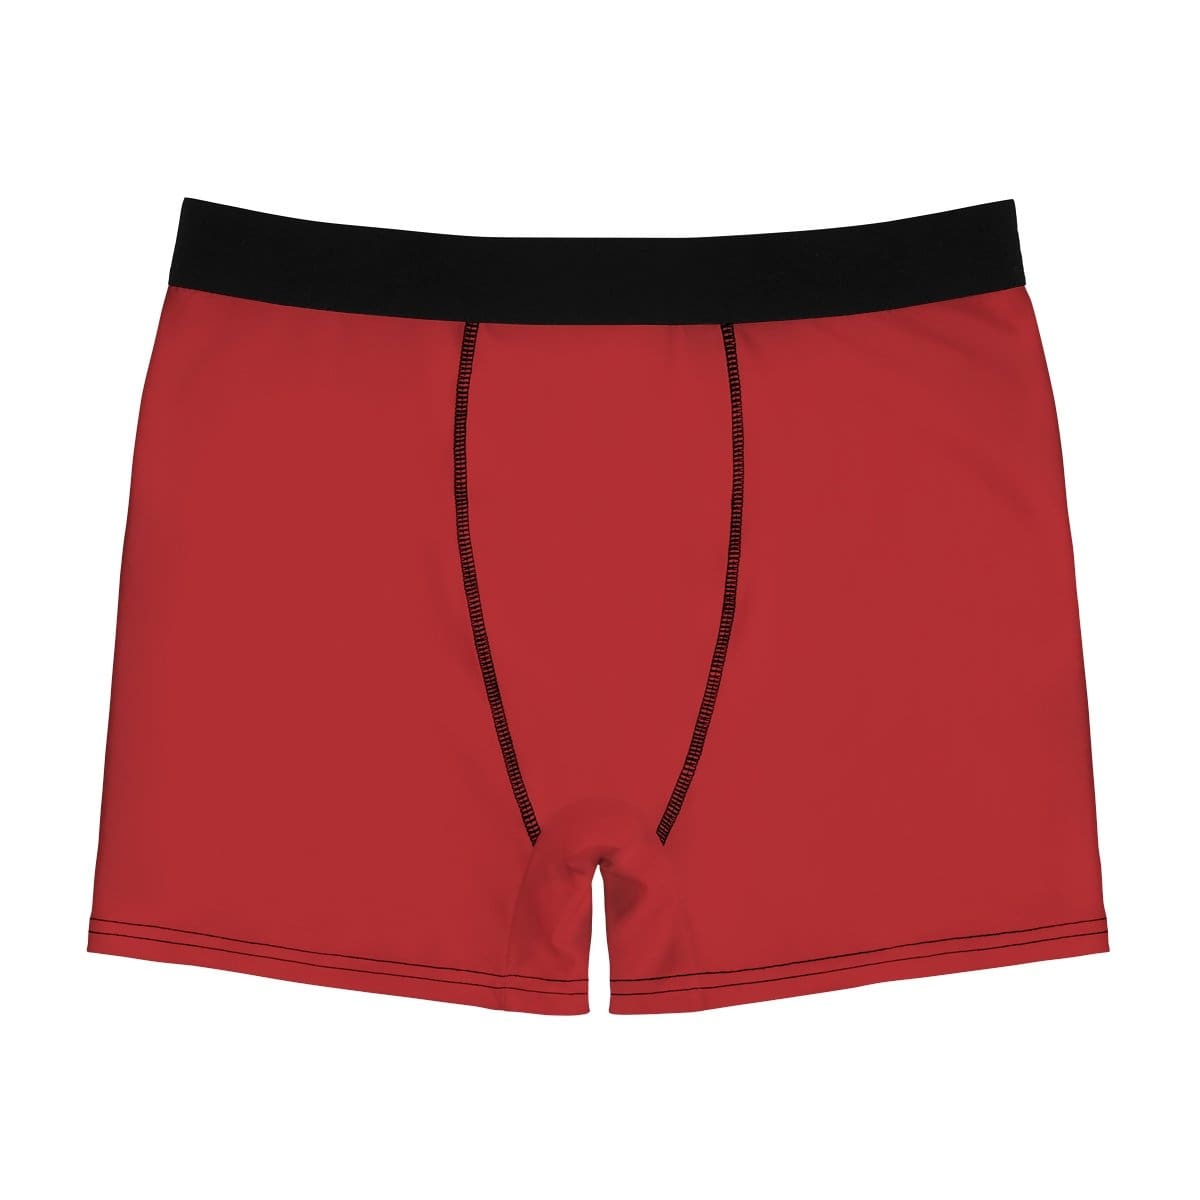 D20 All Natural - Grey on Red Boxer Briefs - All Over Prints